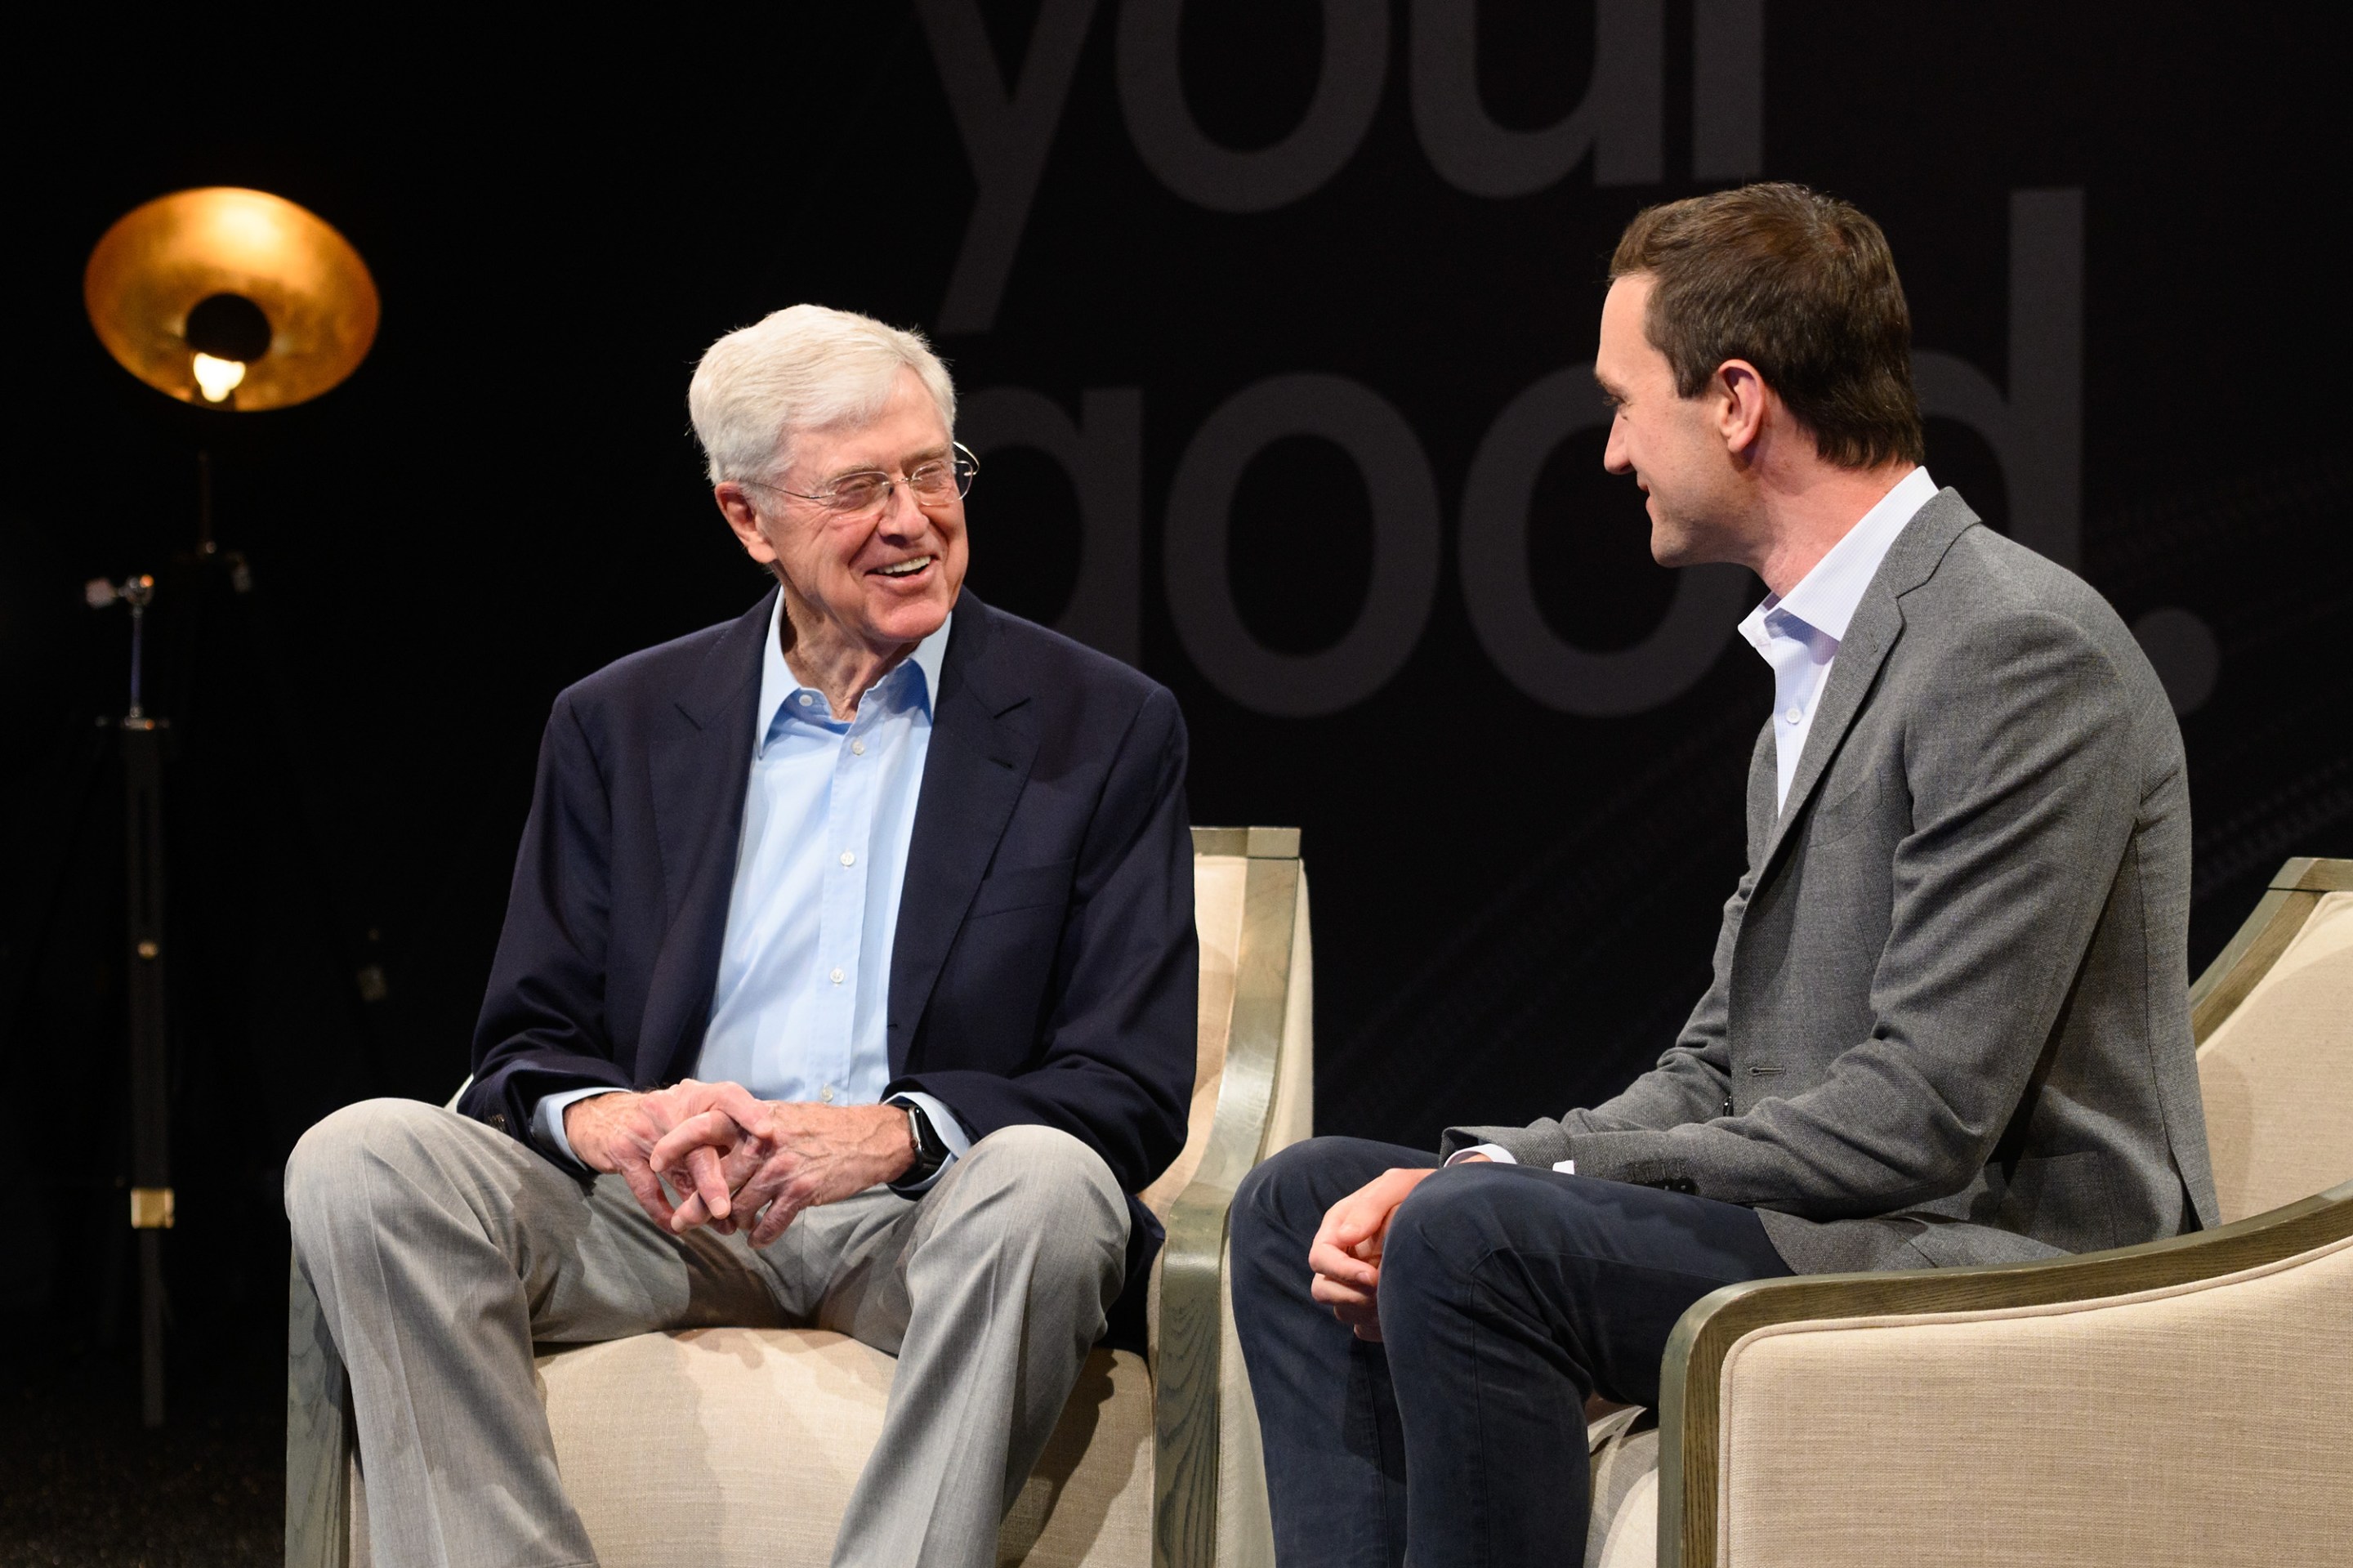 Charles Koch, a billionaire menace to society, speaks to his co-author Brian Hooks